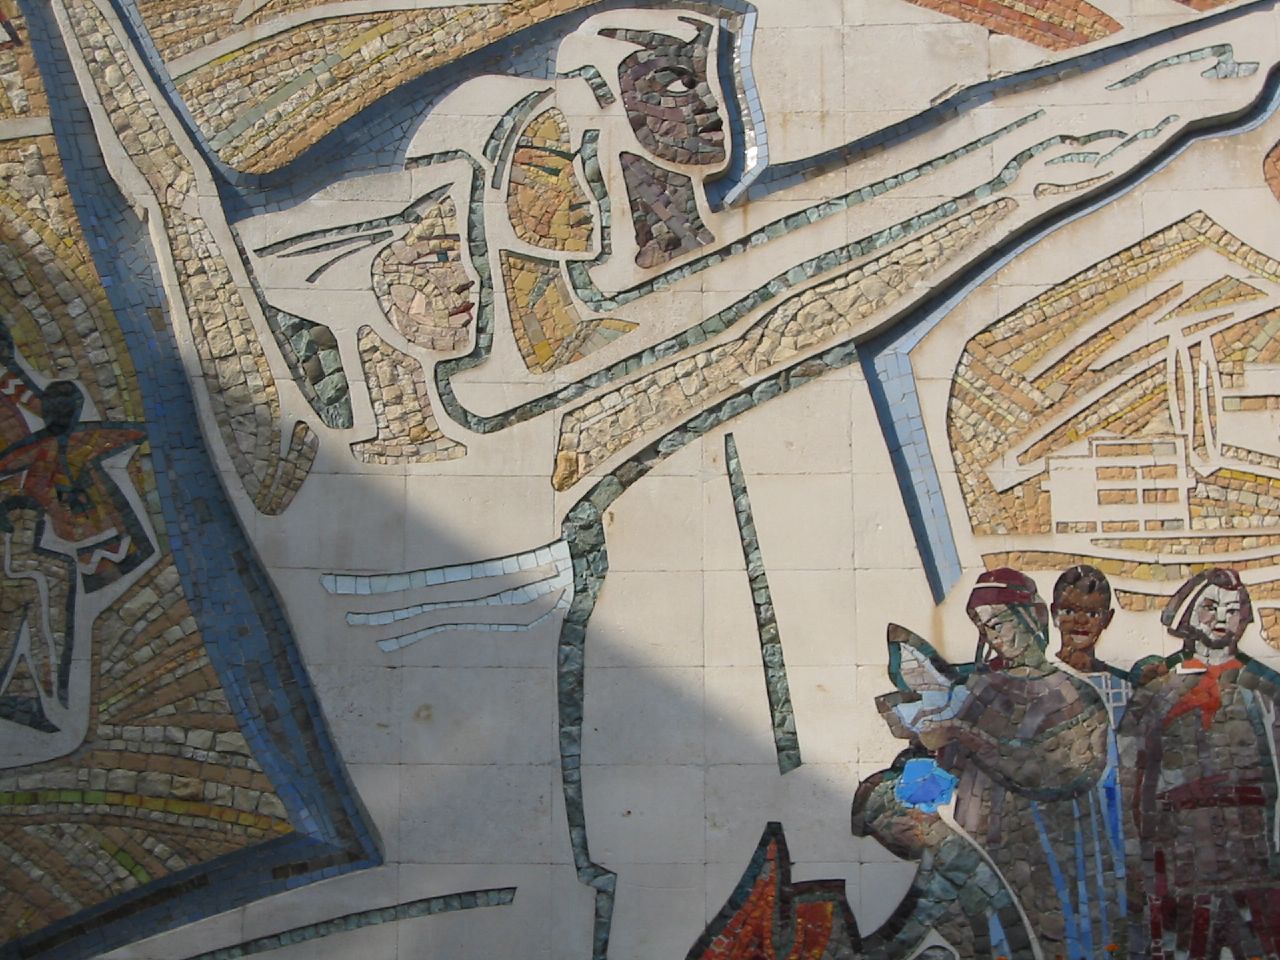 a mural depicting people with weapons standing by each other